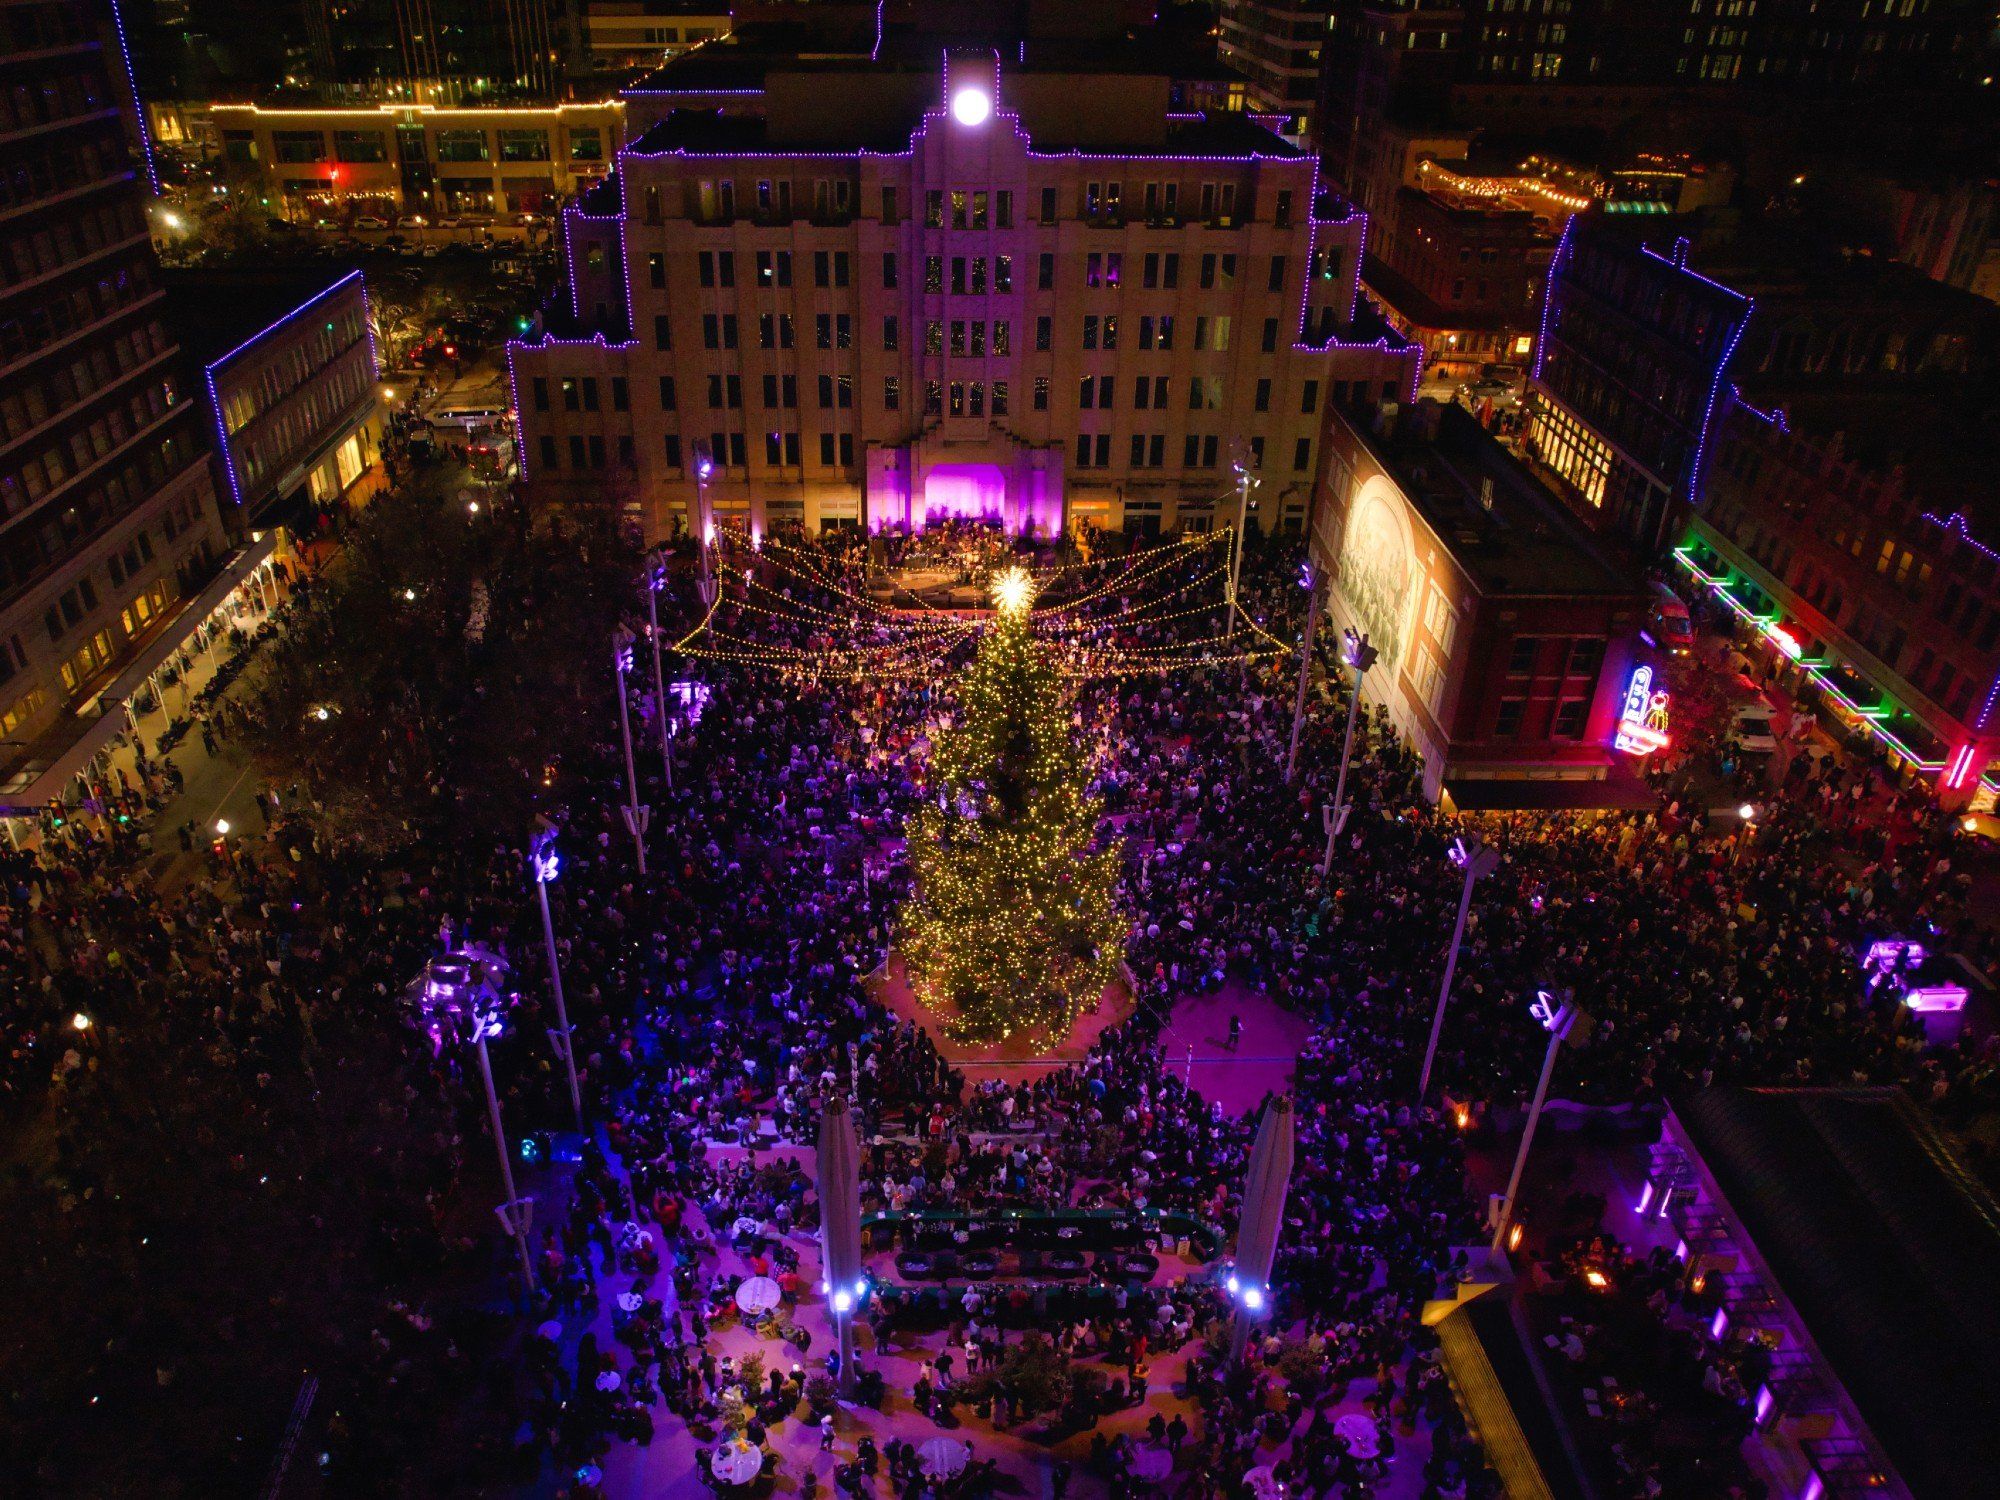 New Year's Eve in Sundance Square